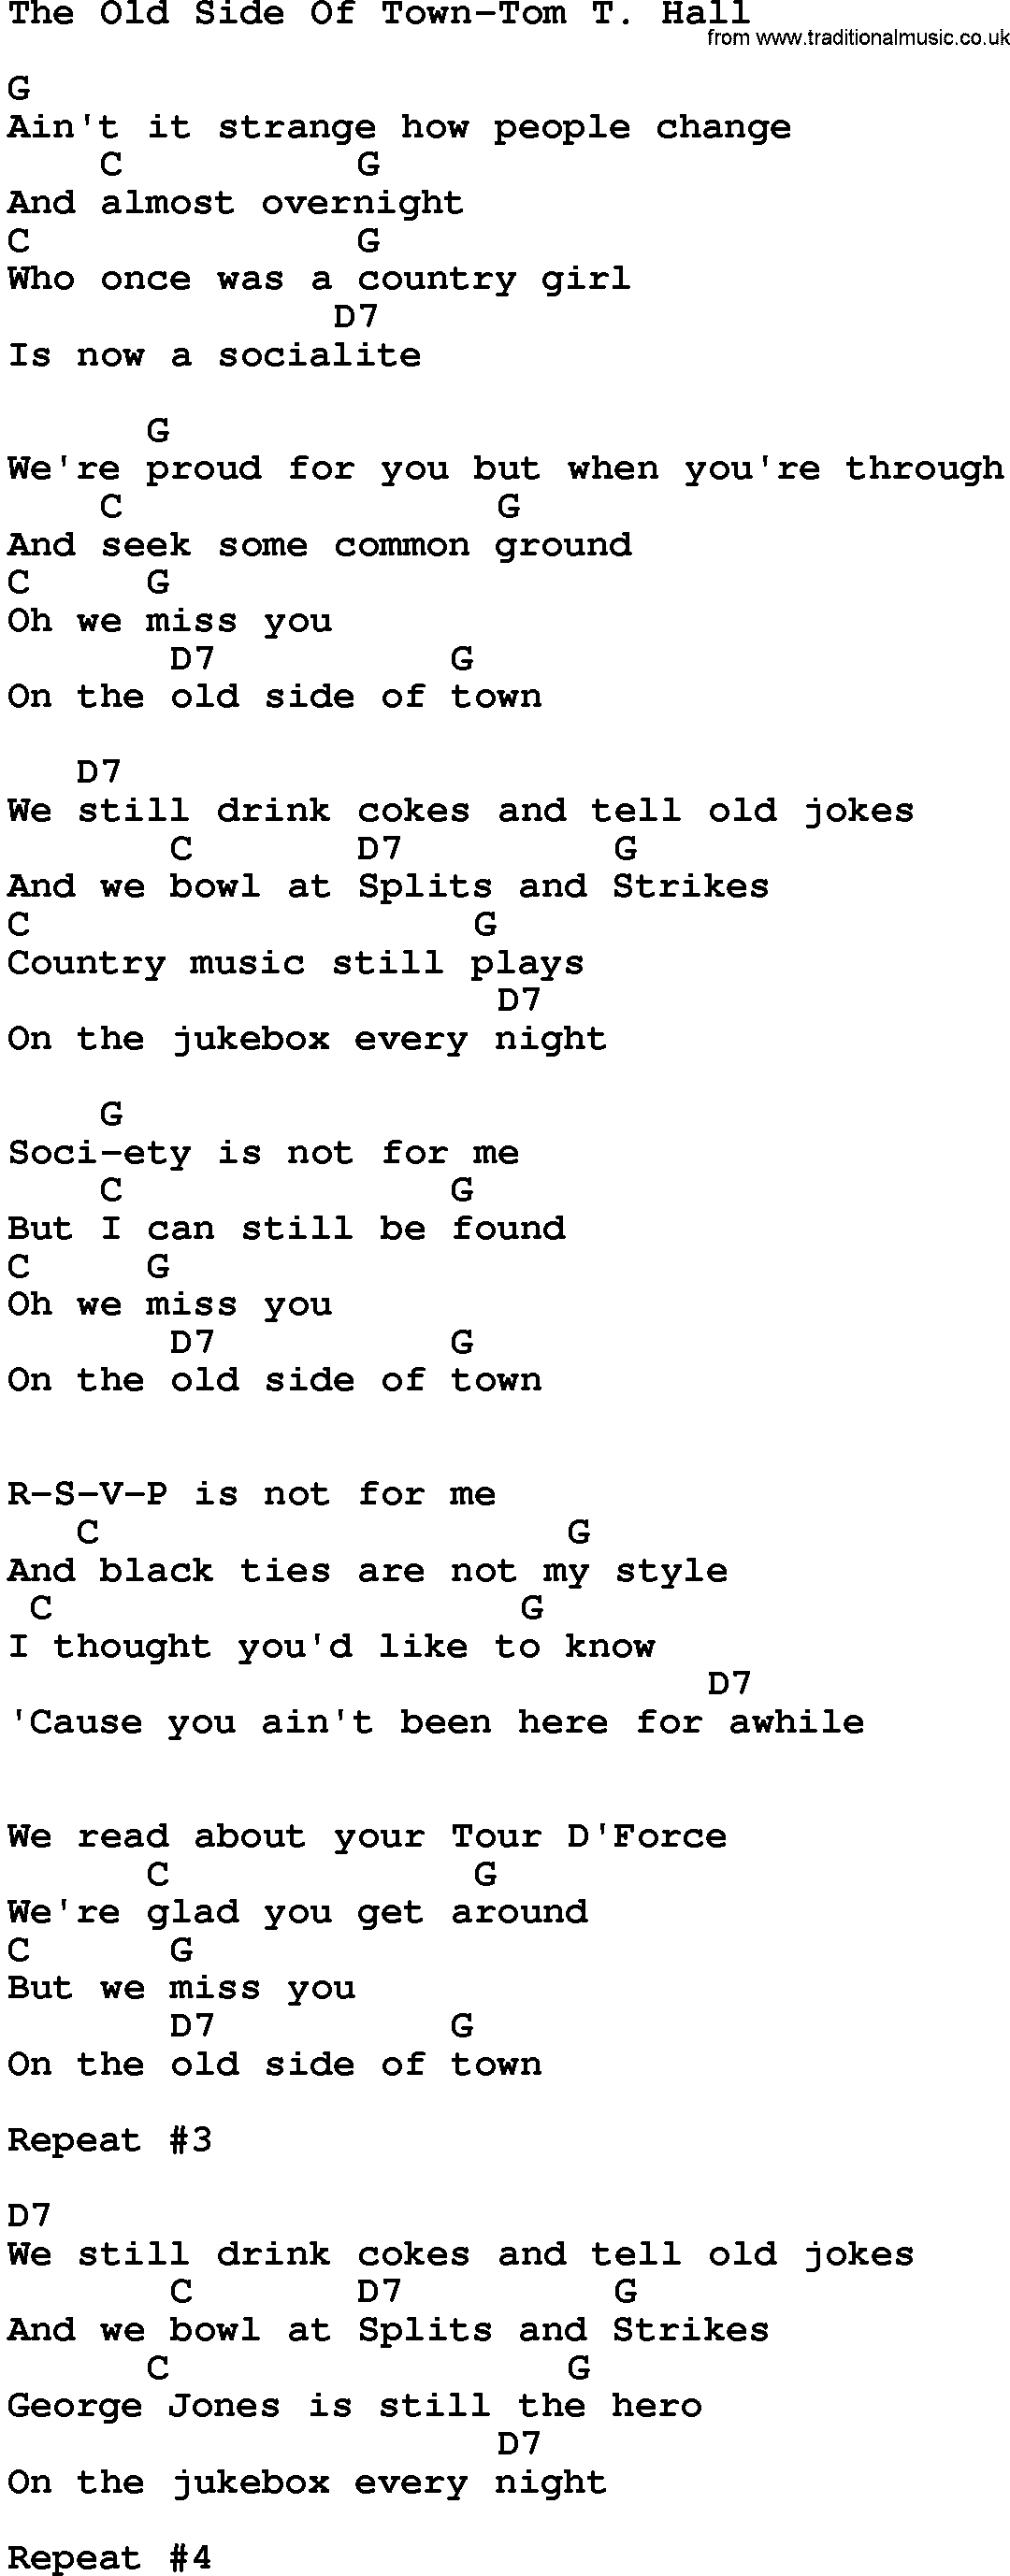 Country music song: The Old Side Of Town-Tom T Hall lyrics and chords